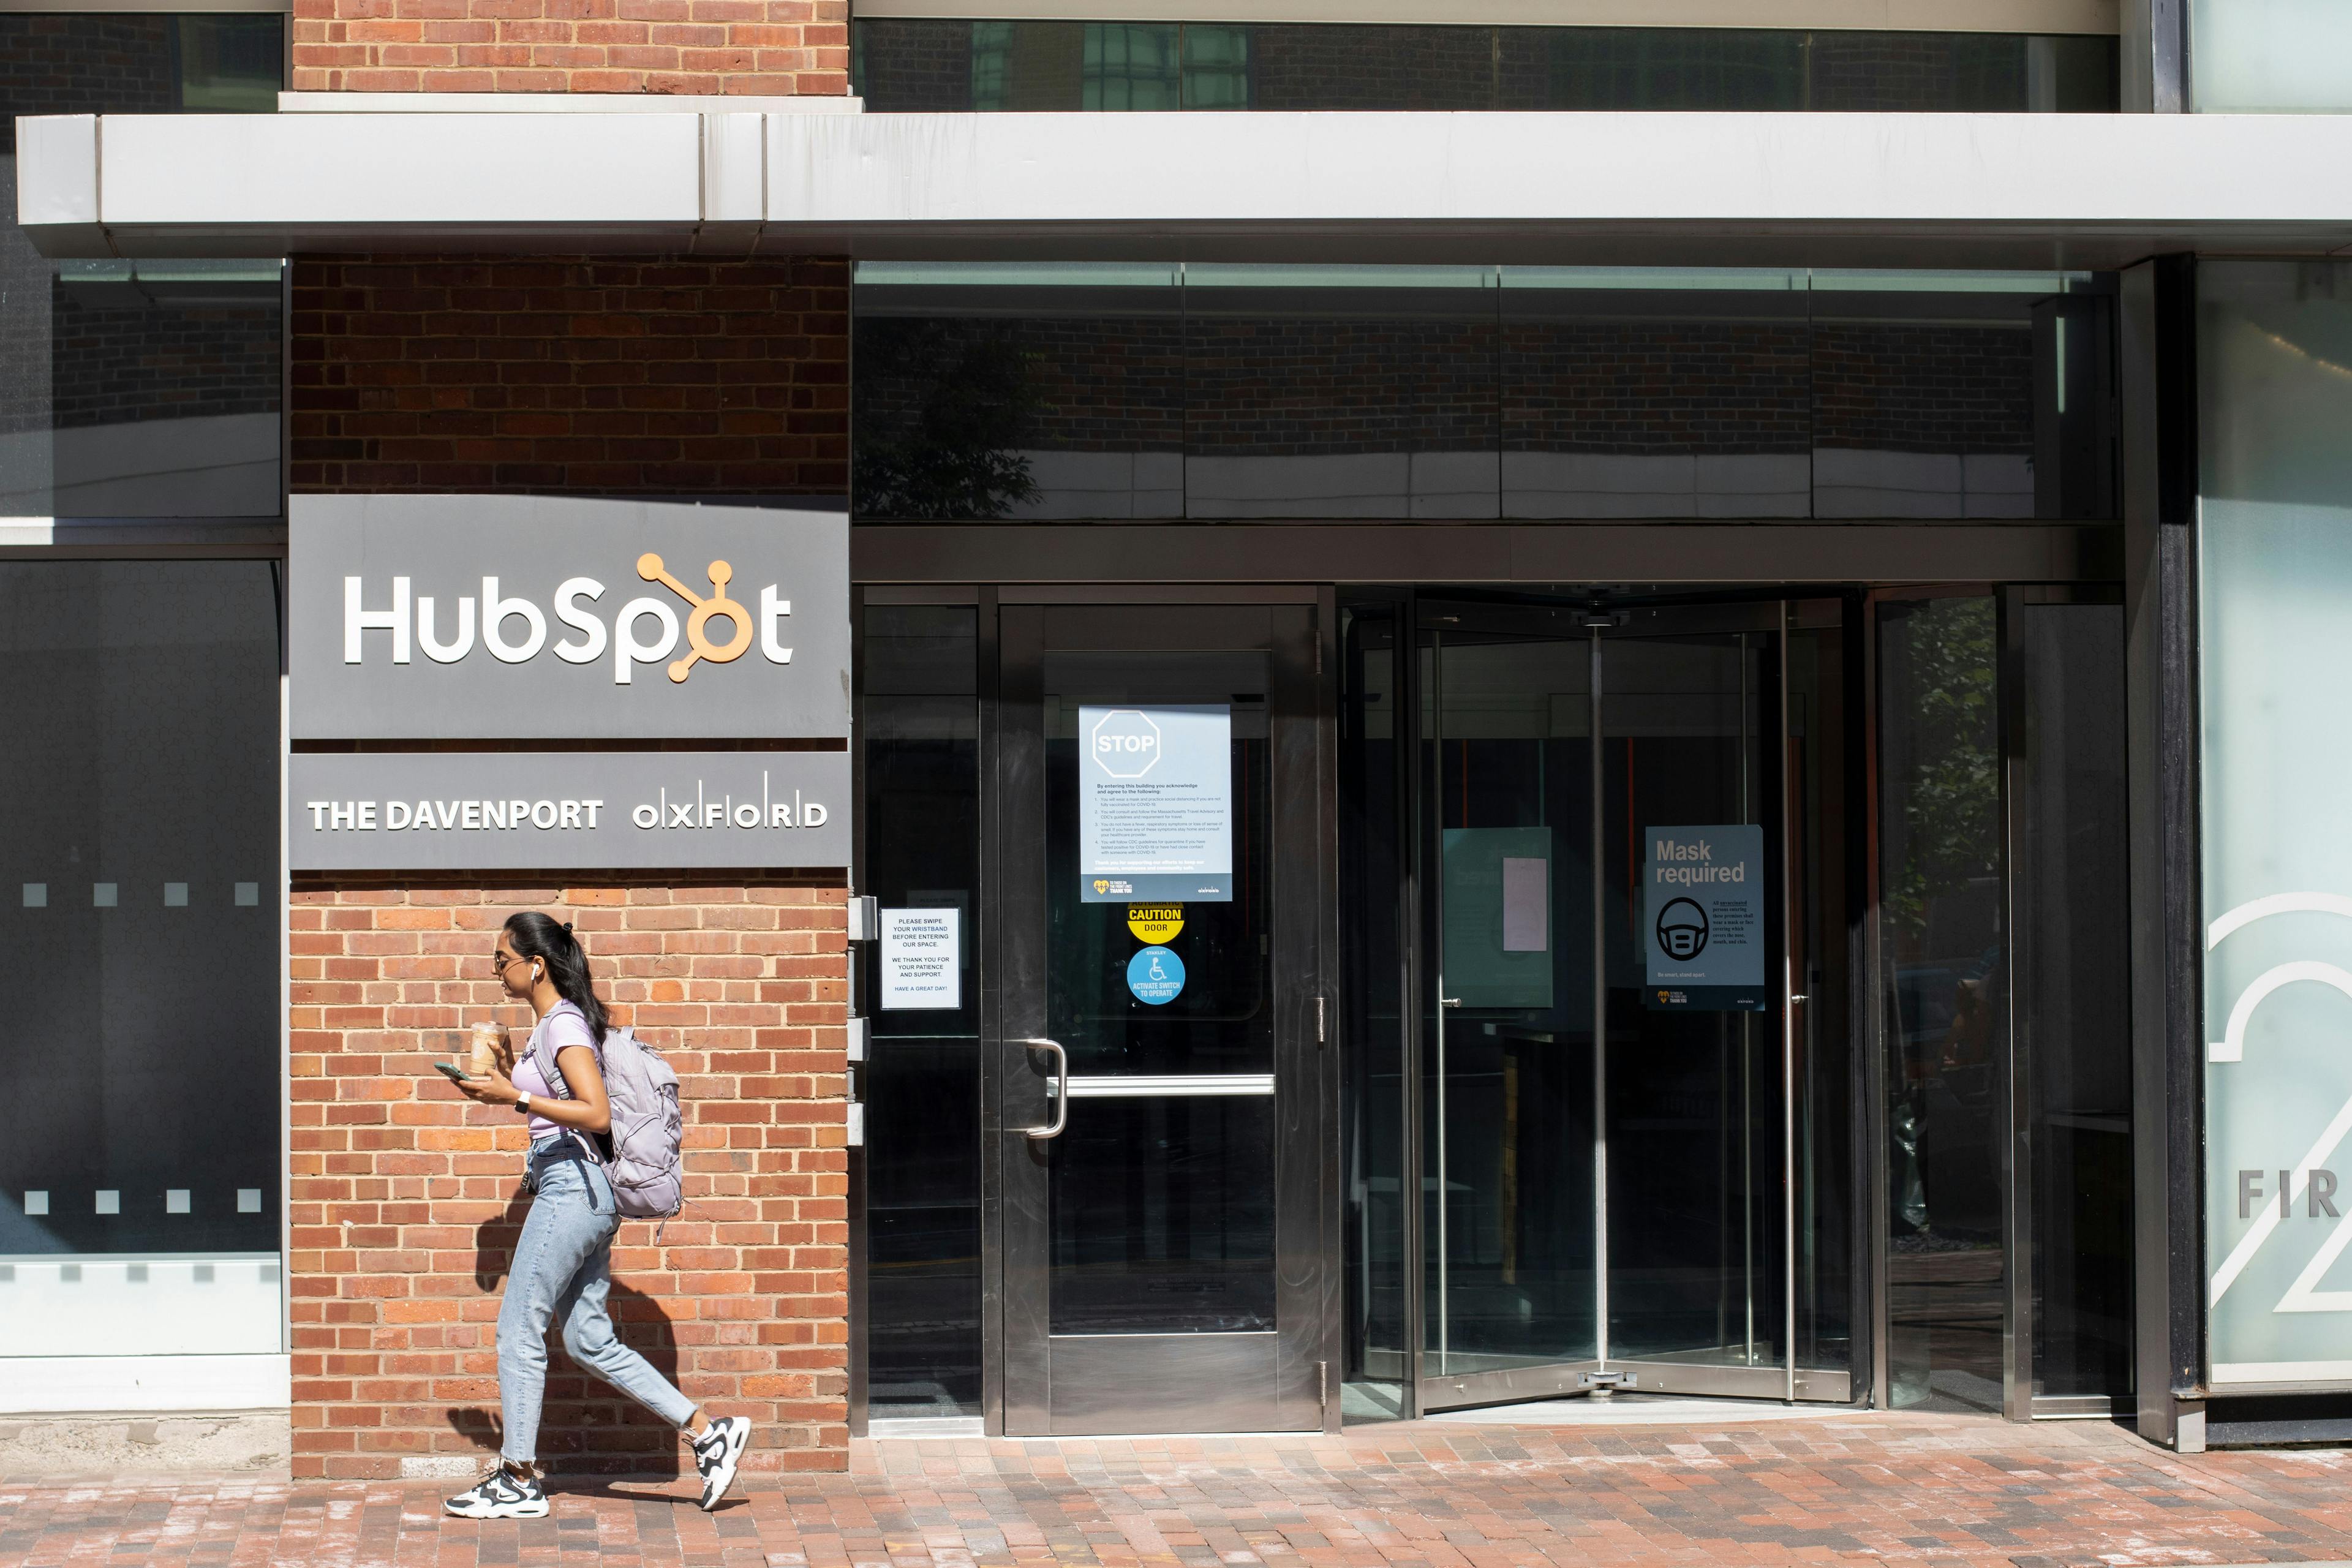 A woman with a backpack walking across the entrance to a Hubspot building.